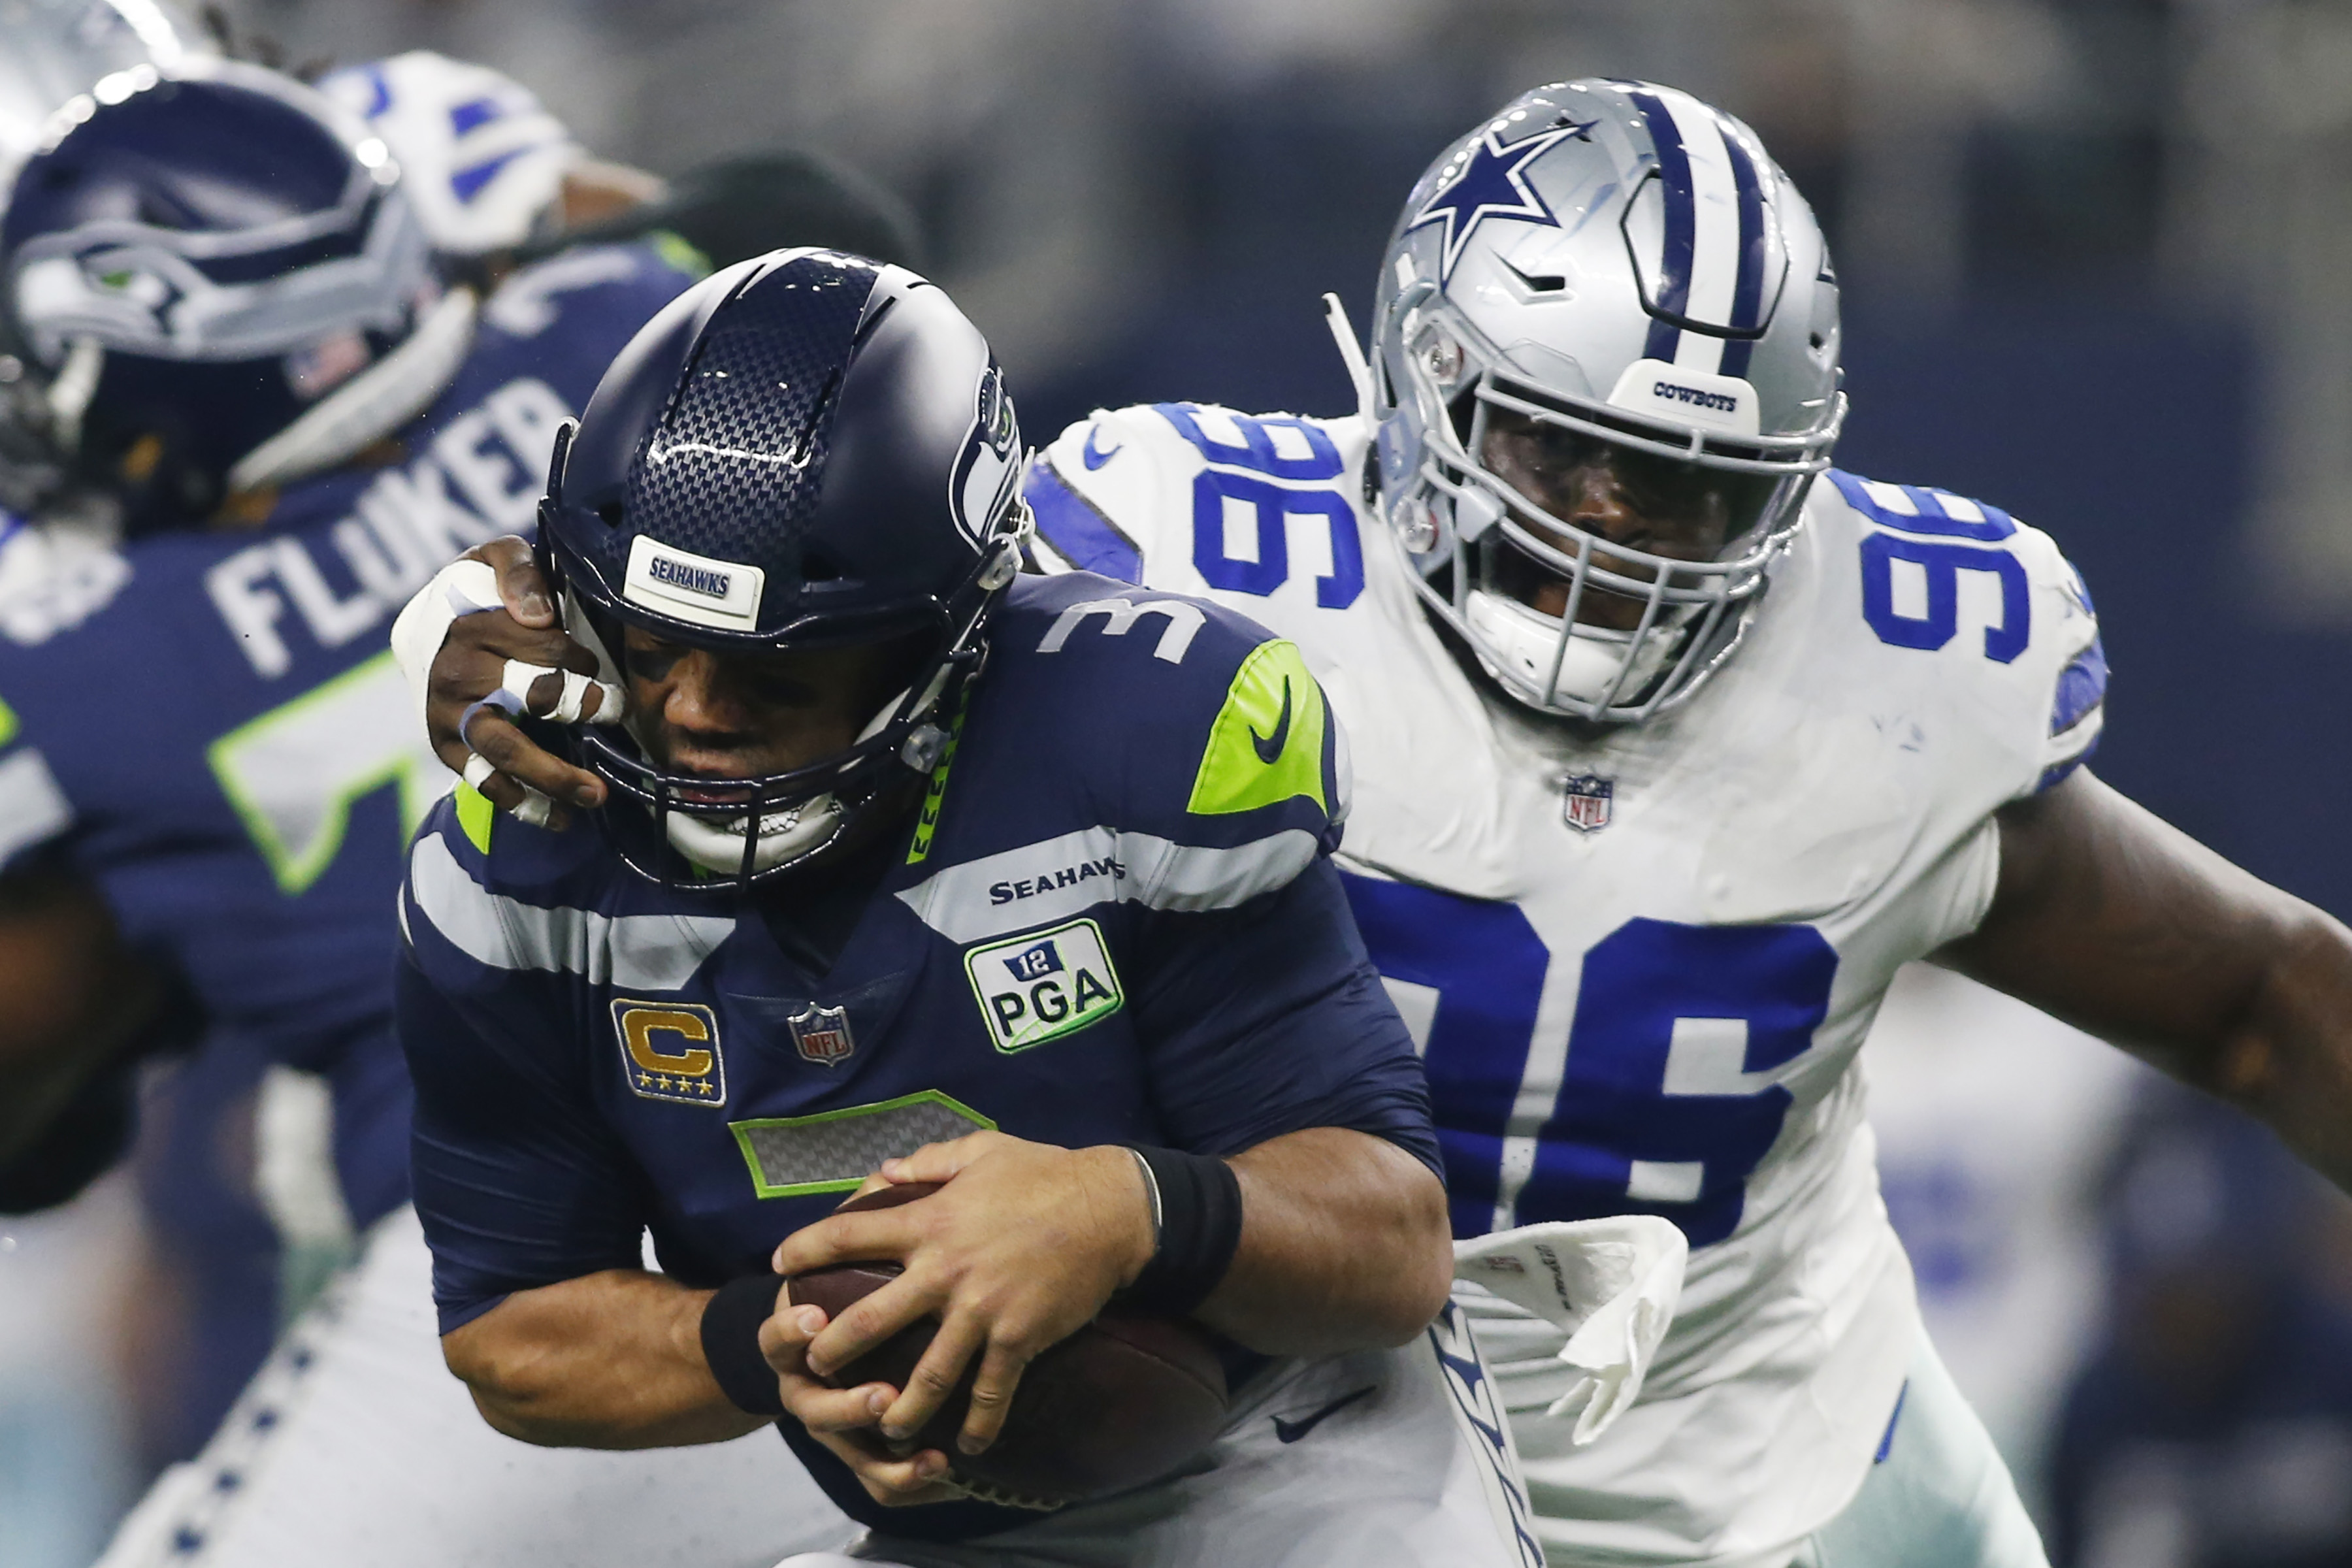 The Dallas Cowboys’ top 20 base salary players for 2019